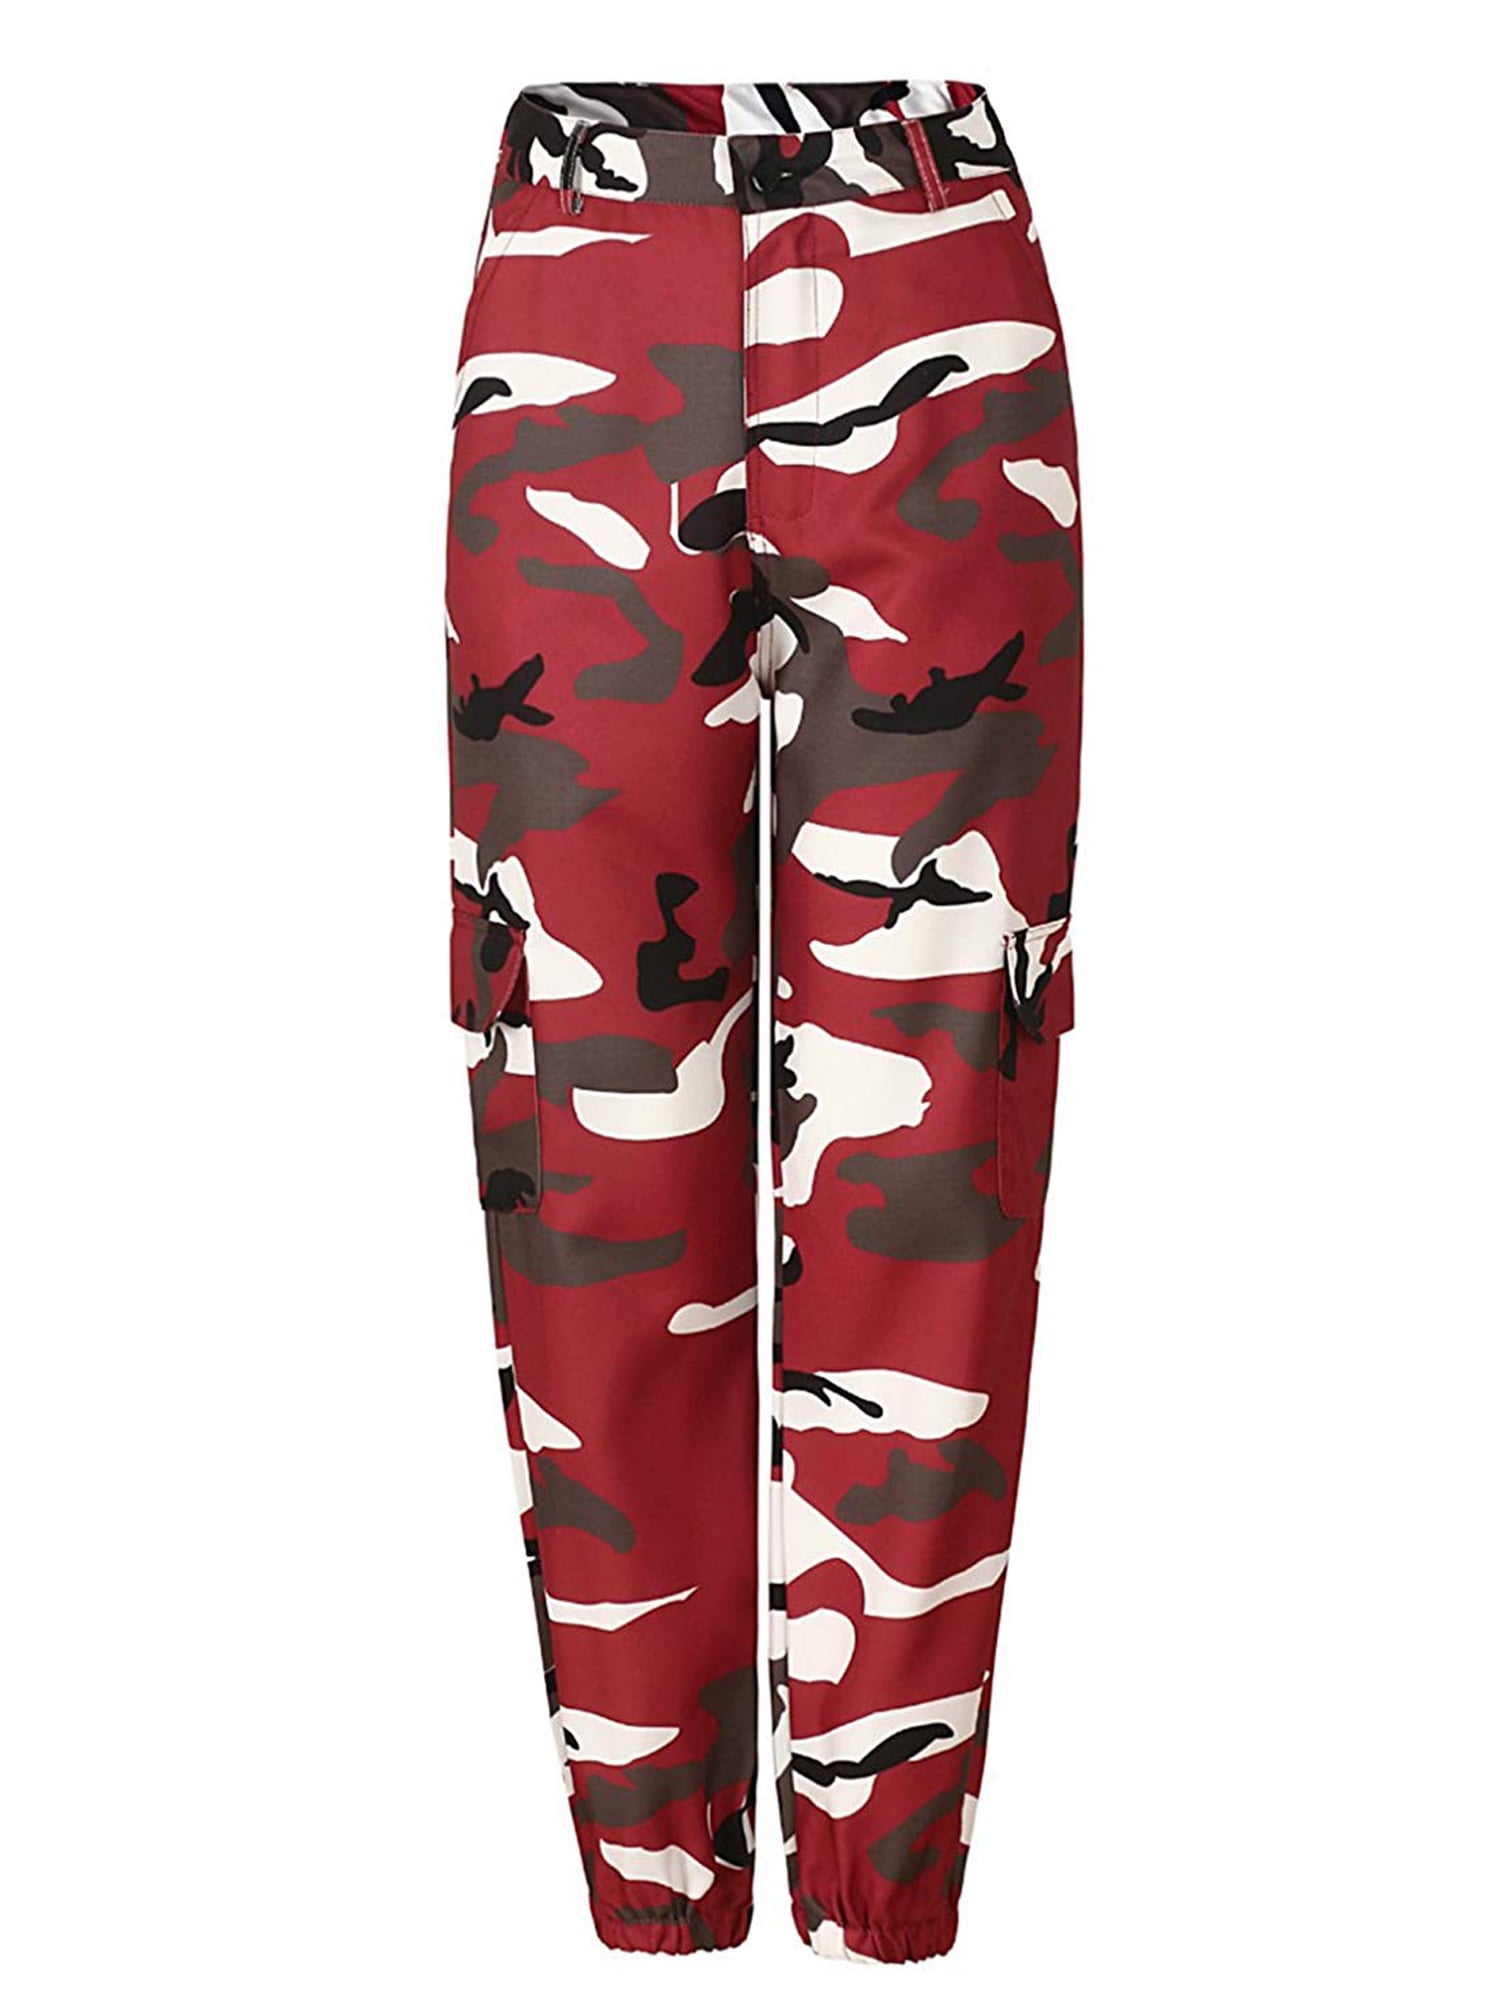 red camo jeans